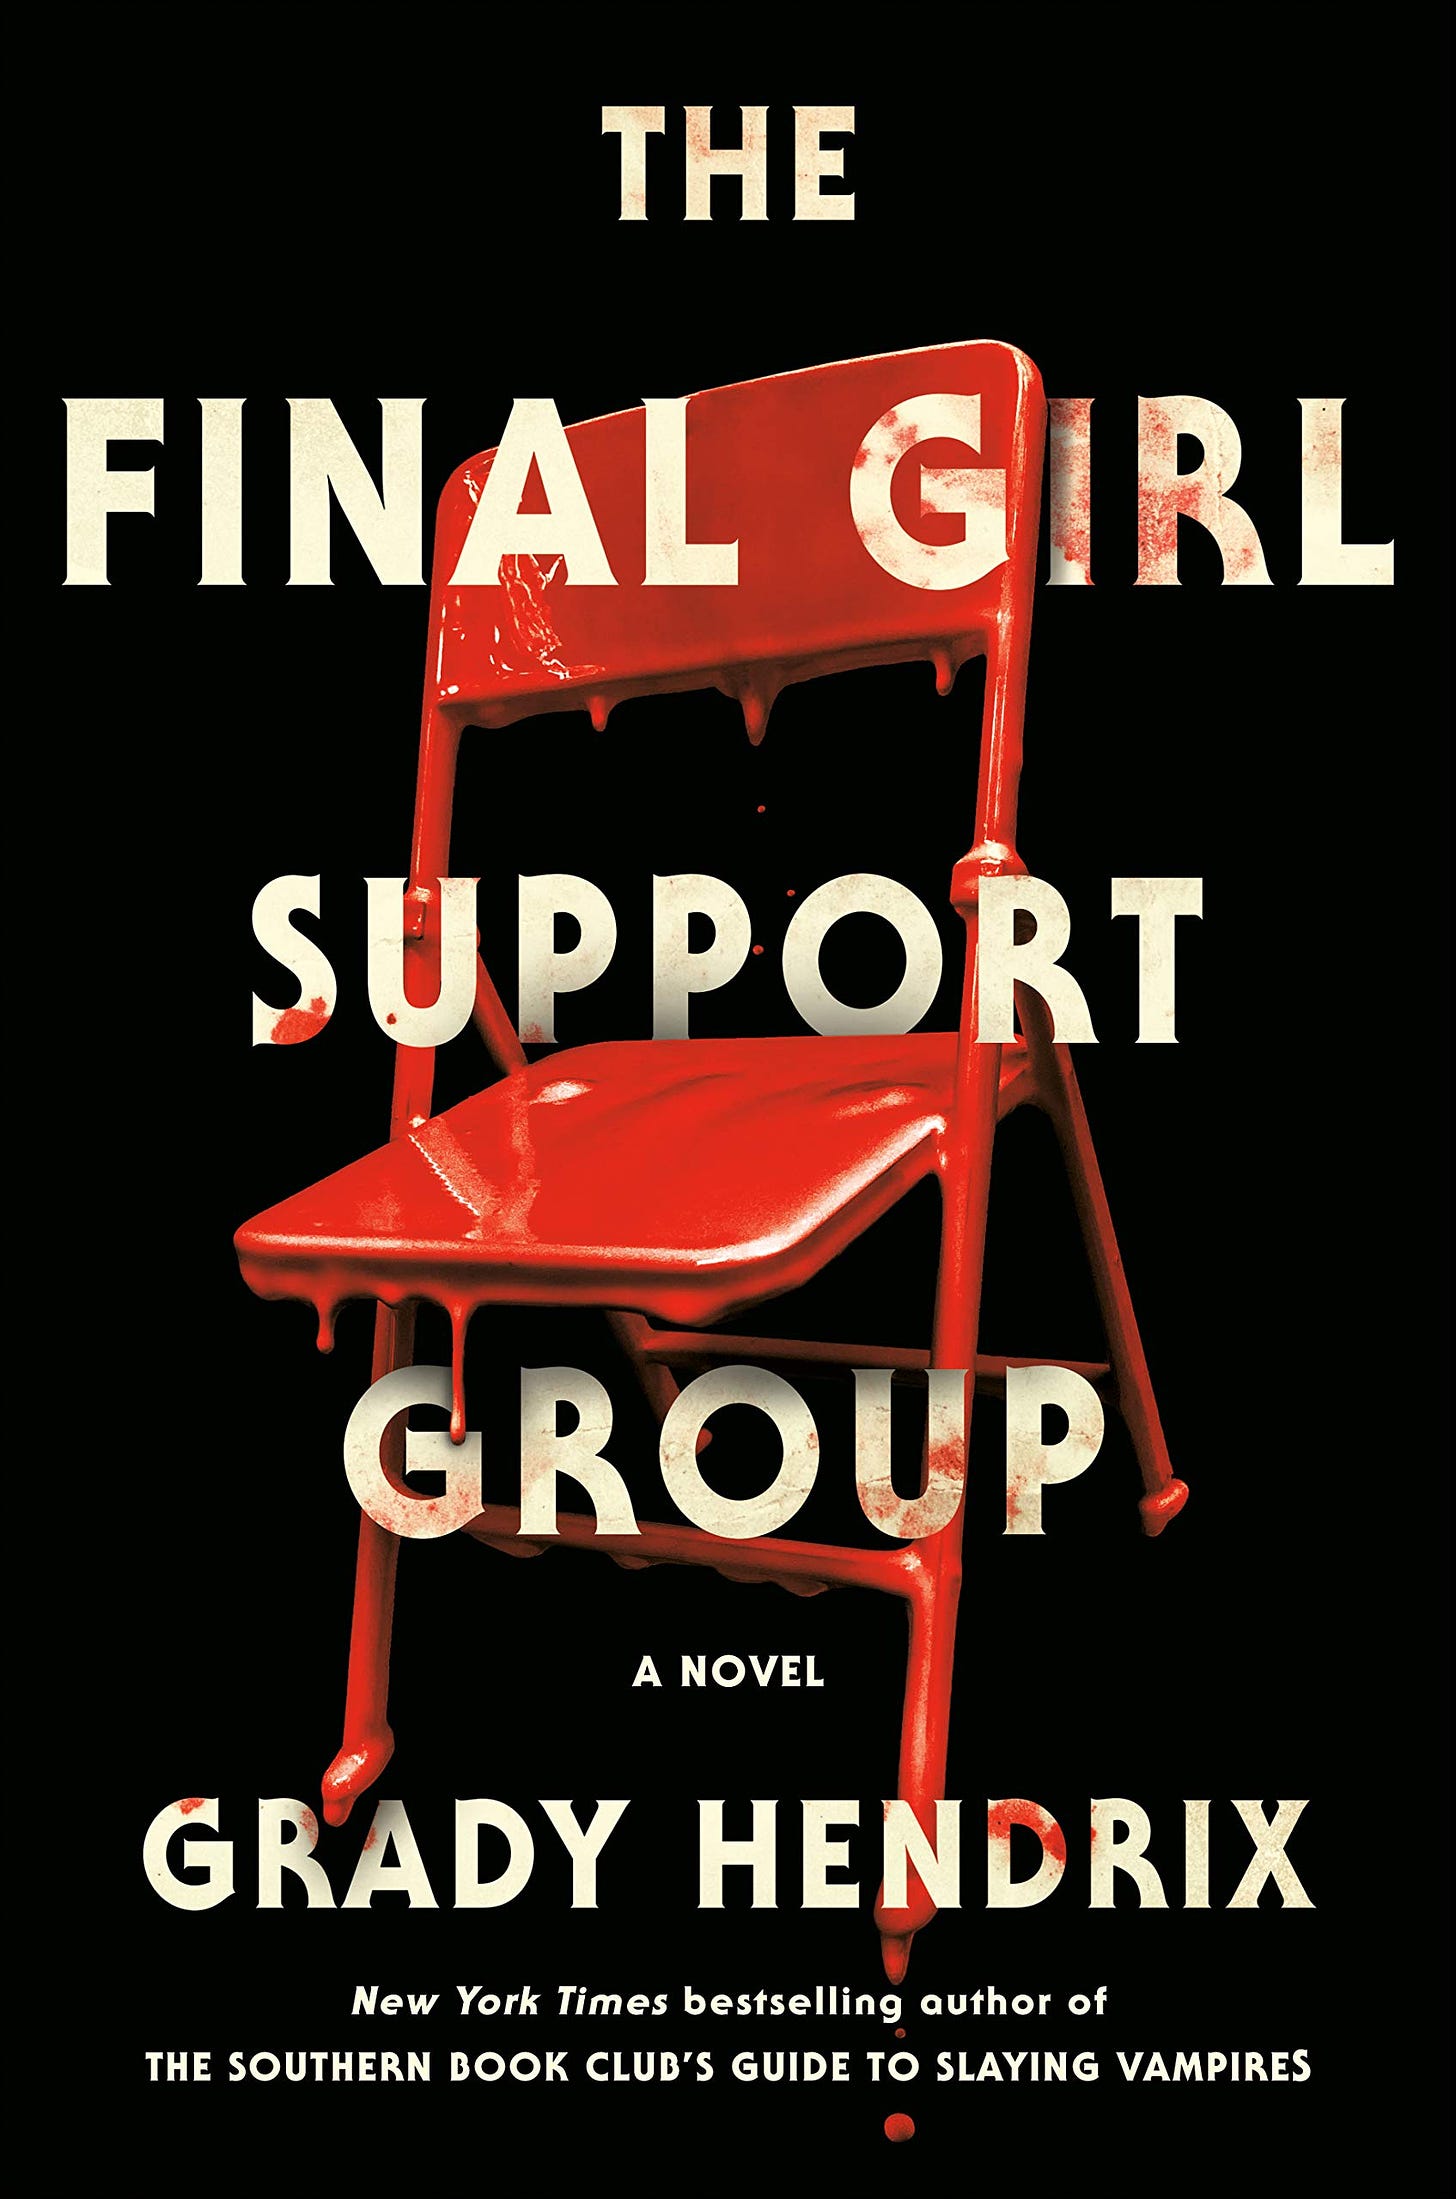 Cover of The Final Girl Support Group by Grady Hendrix